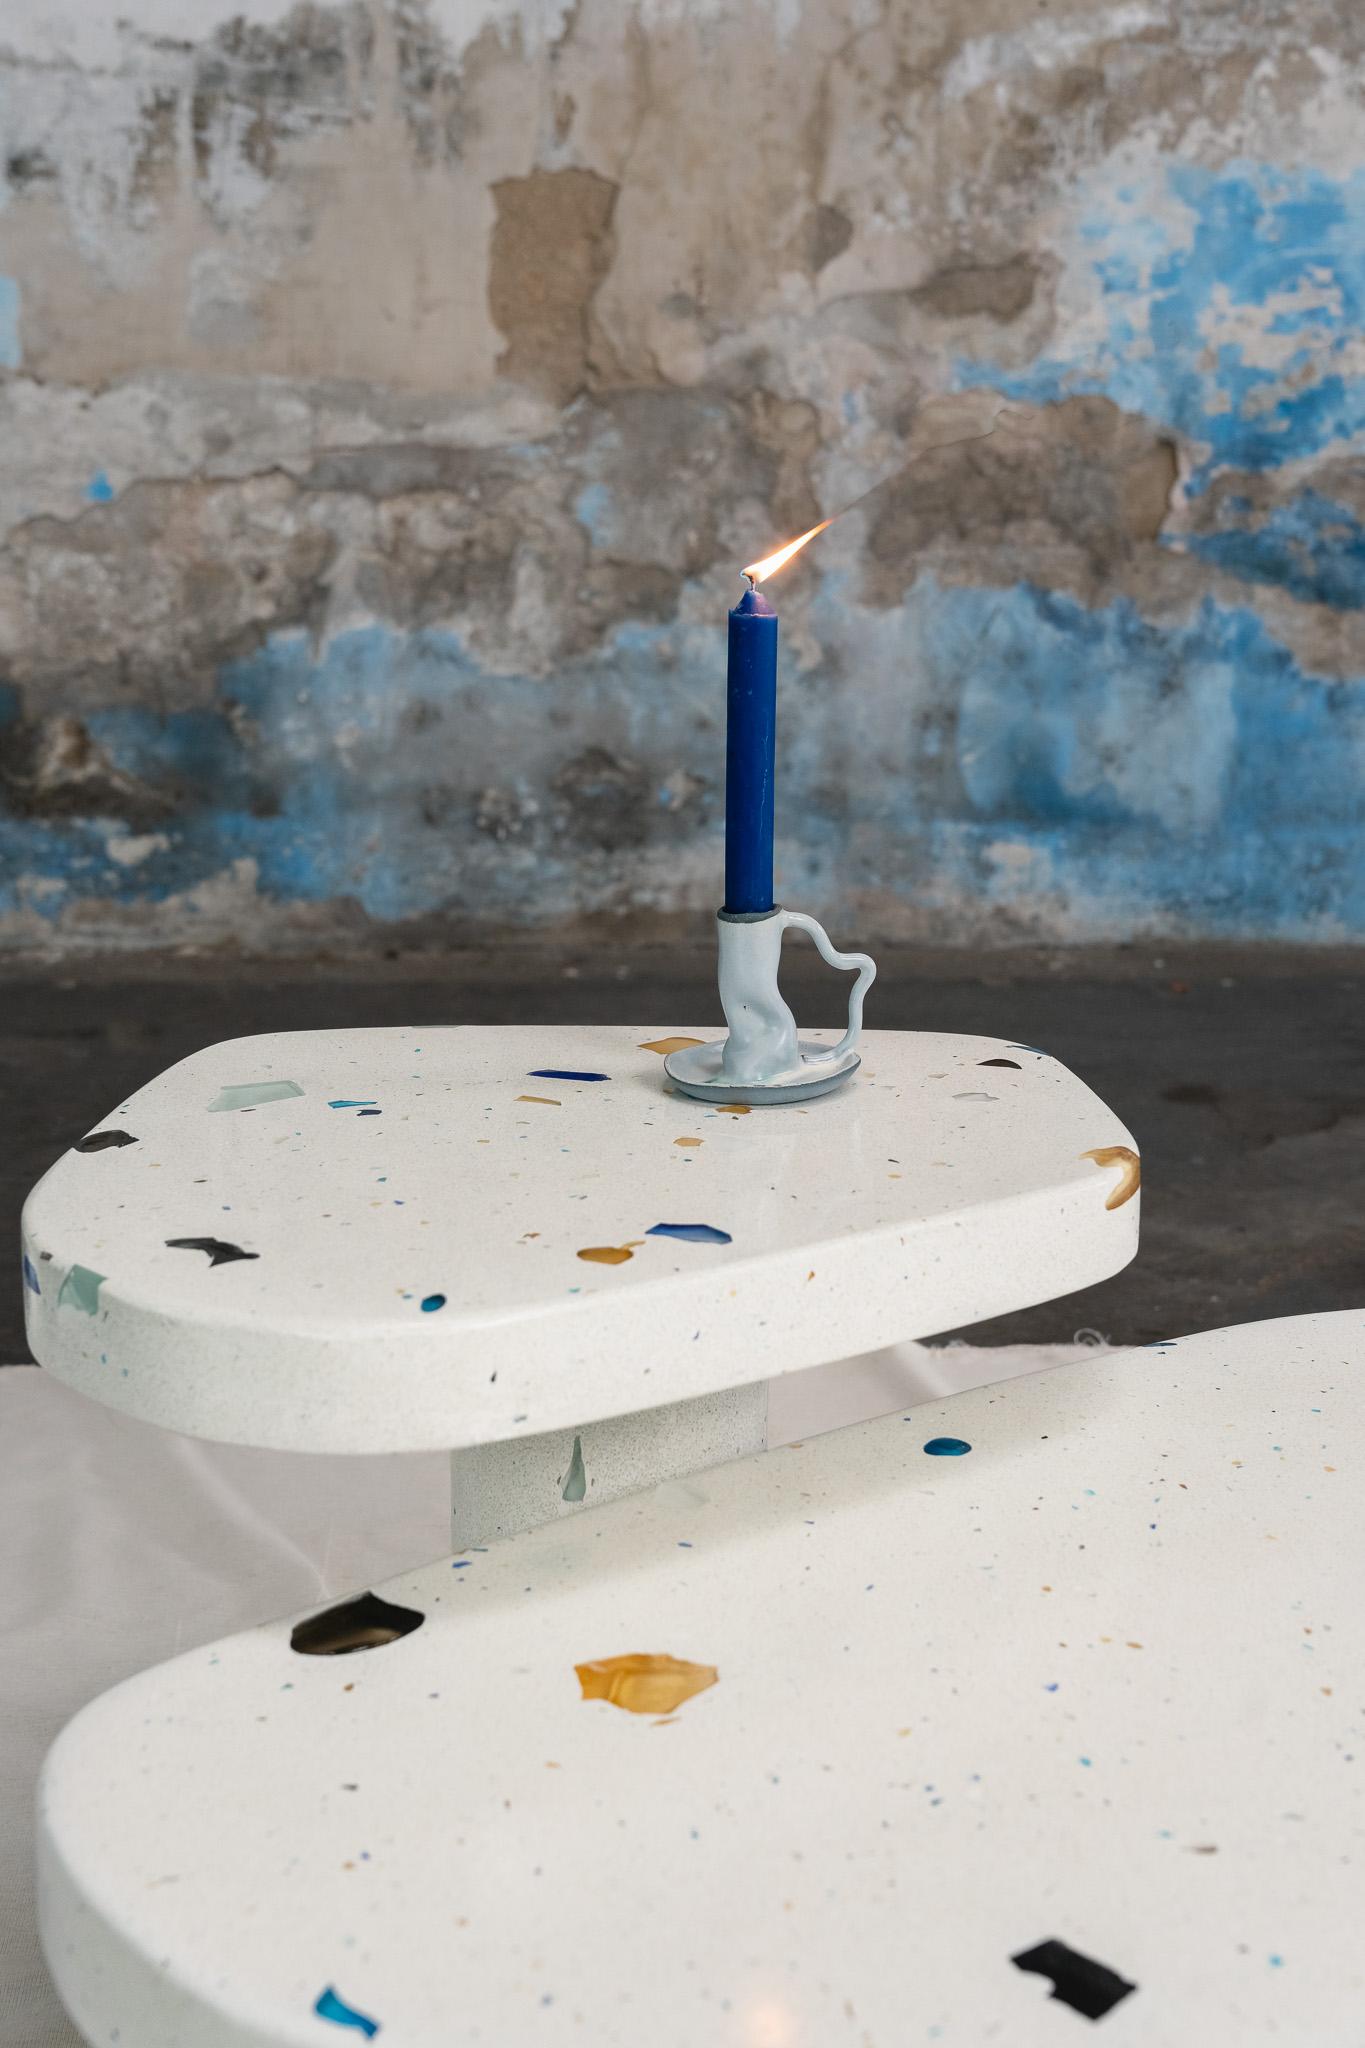 The Mono Side Table takes part of the MONOMORFO collection. It has an amorphous top with 4 possible variations of shape. The terrazzo composition is made of leftover glass crystals from a glass crystal factory in Minas Gerais, Brazil. This leftover